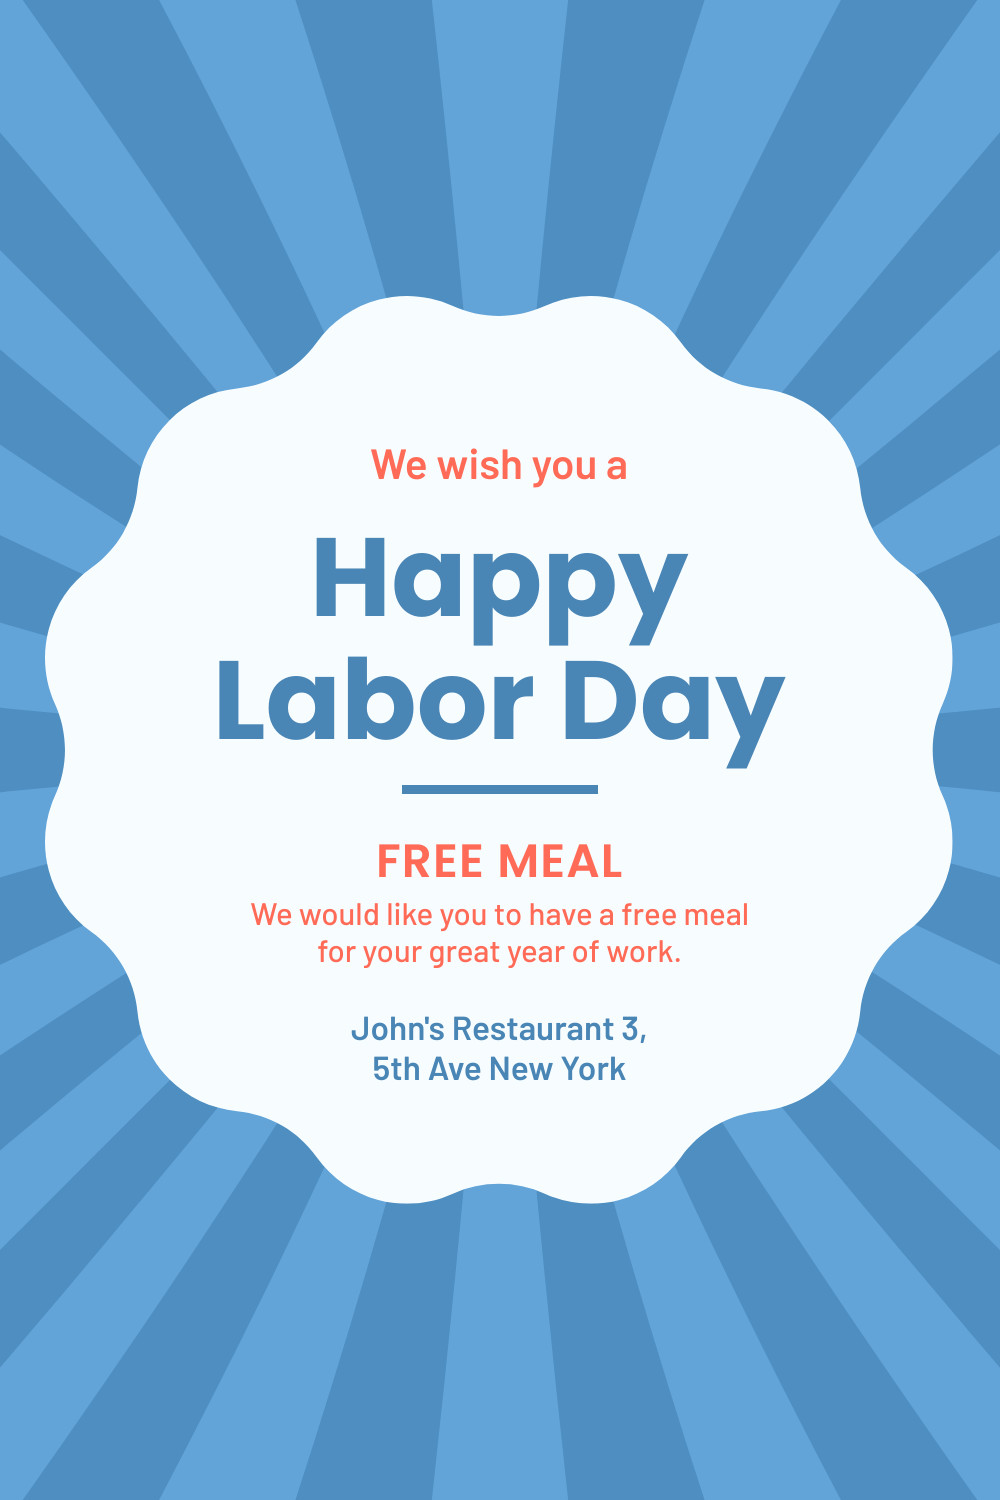 Labor Day Free Meal Facebook Cover 820x360